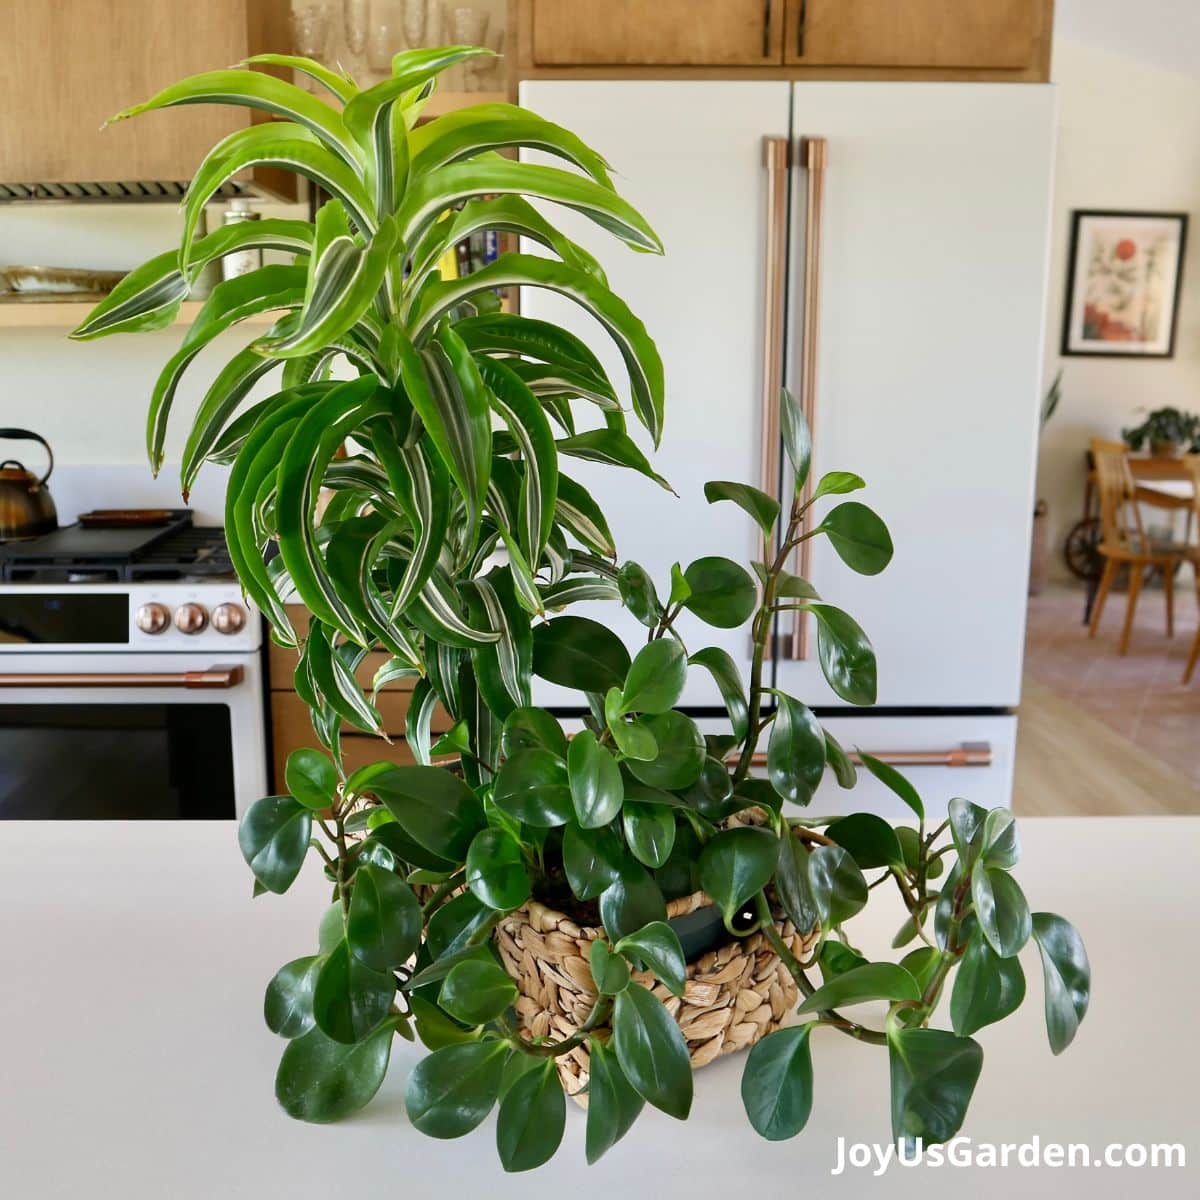 A baby rubber plant & a dracaena lemon surprise grow in a rectangular basket on a kitchen counter.